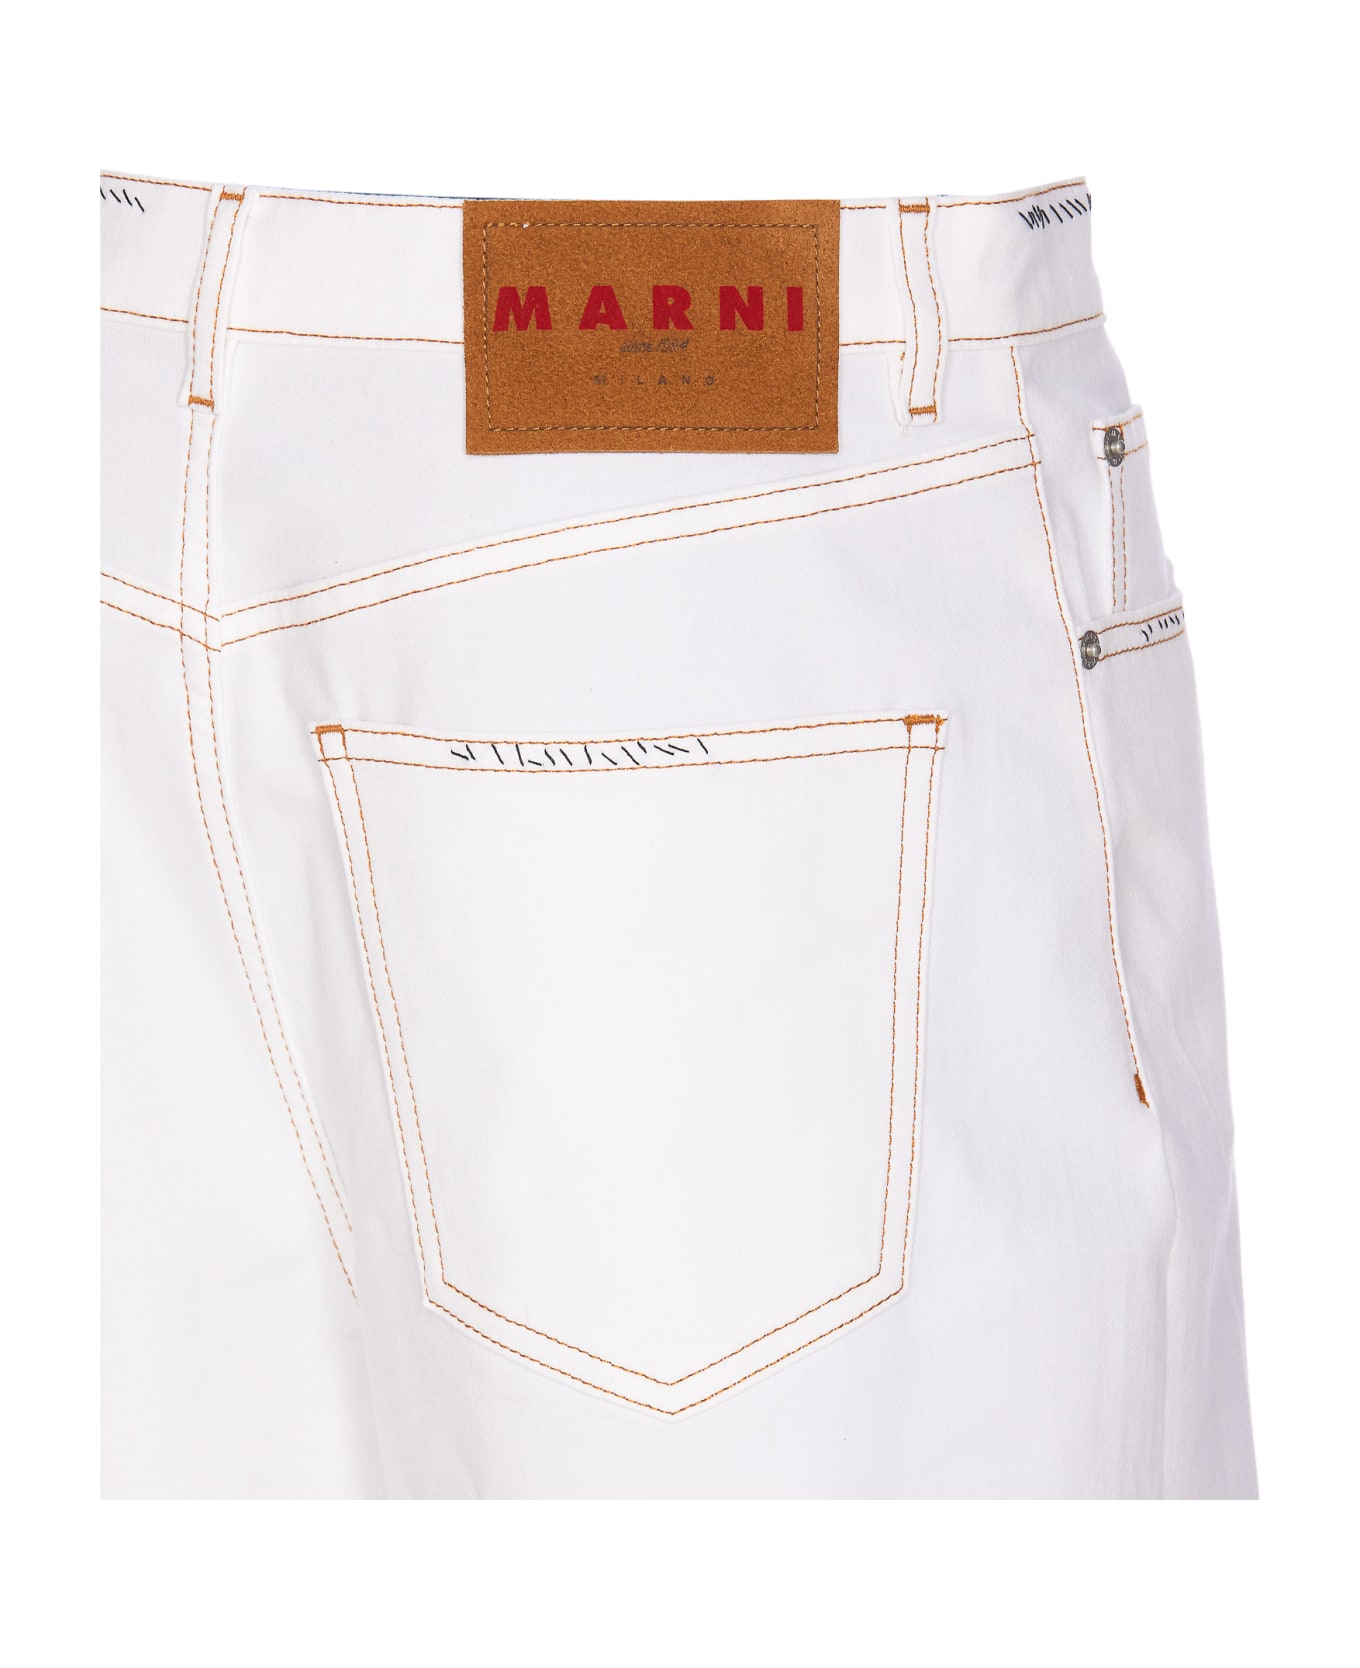 Marni Denim Pants With Flower Patch